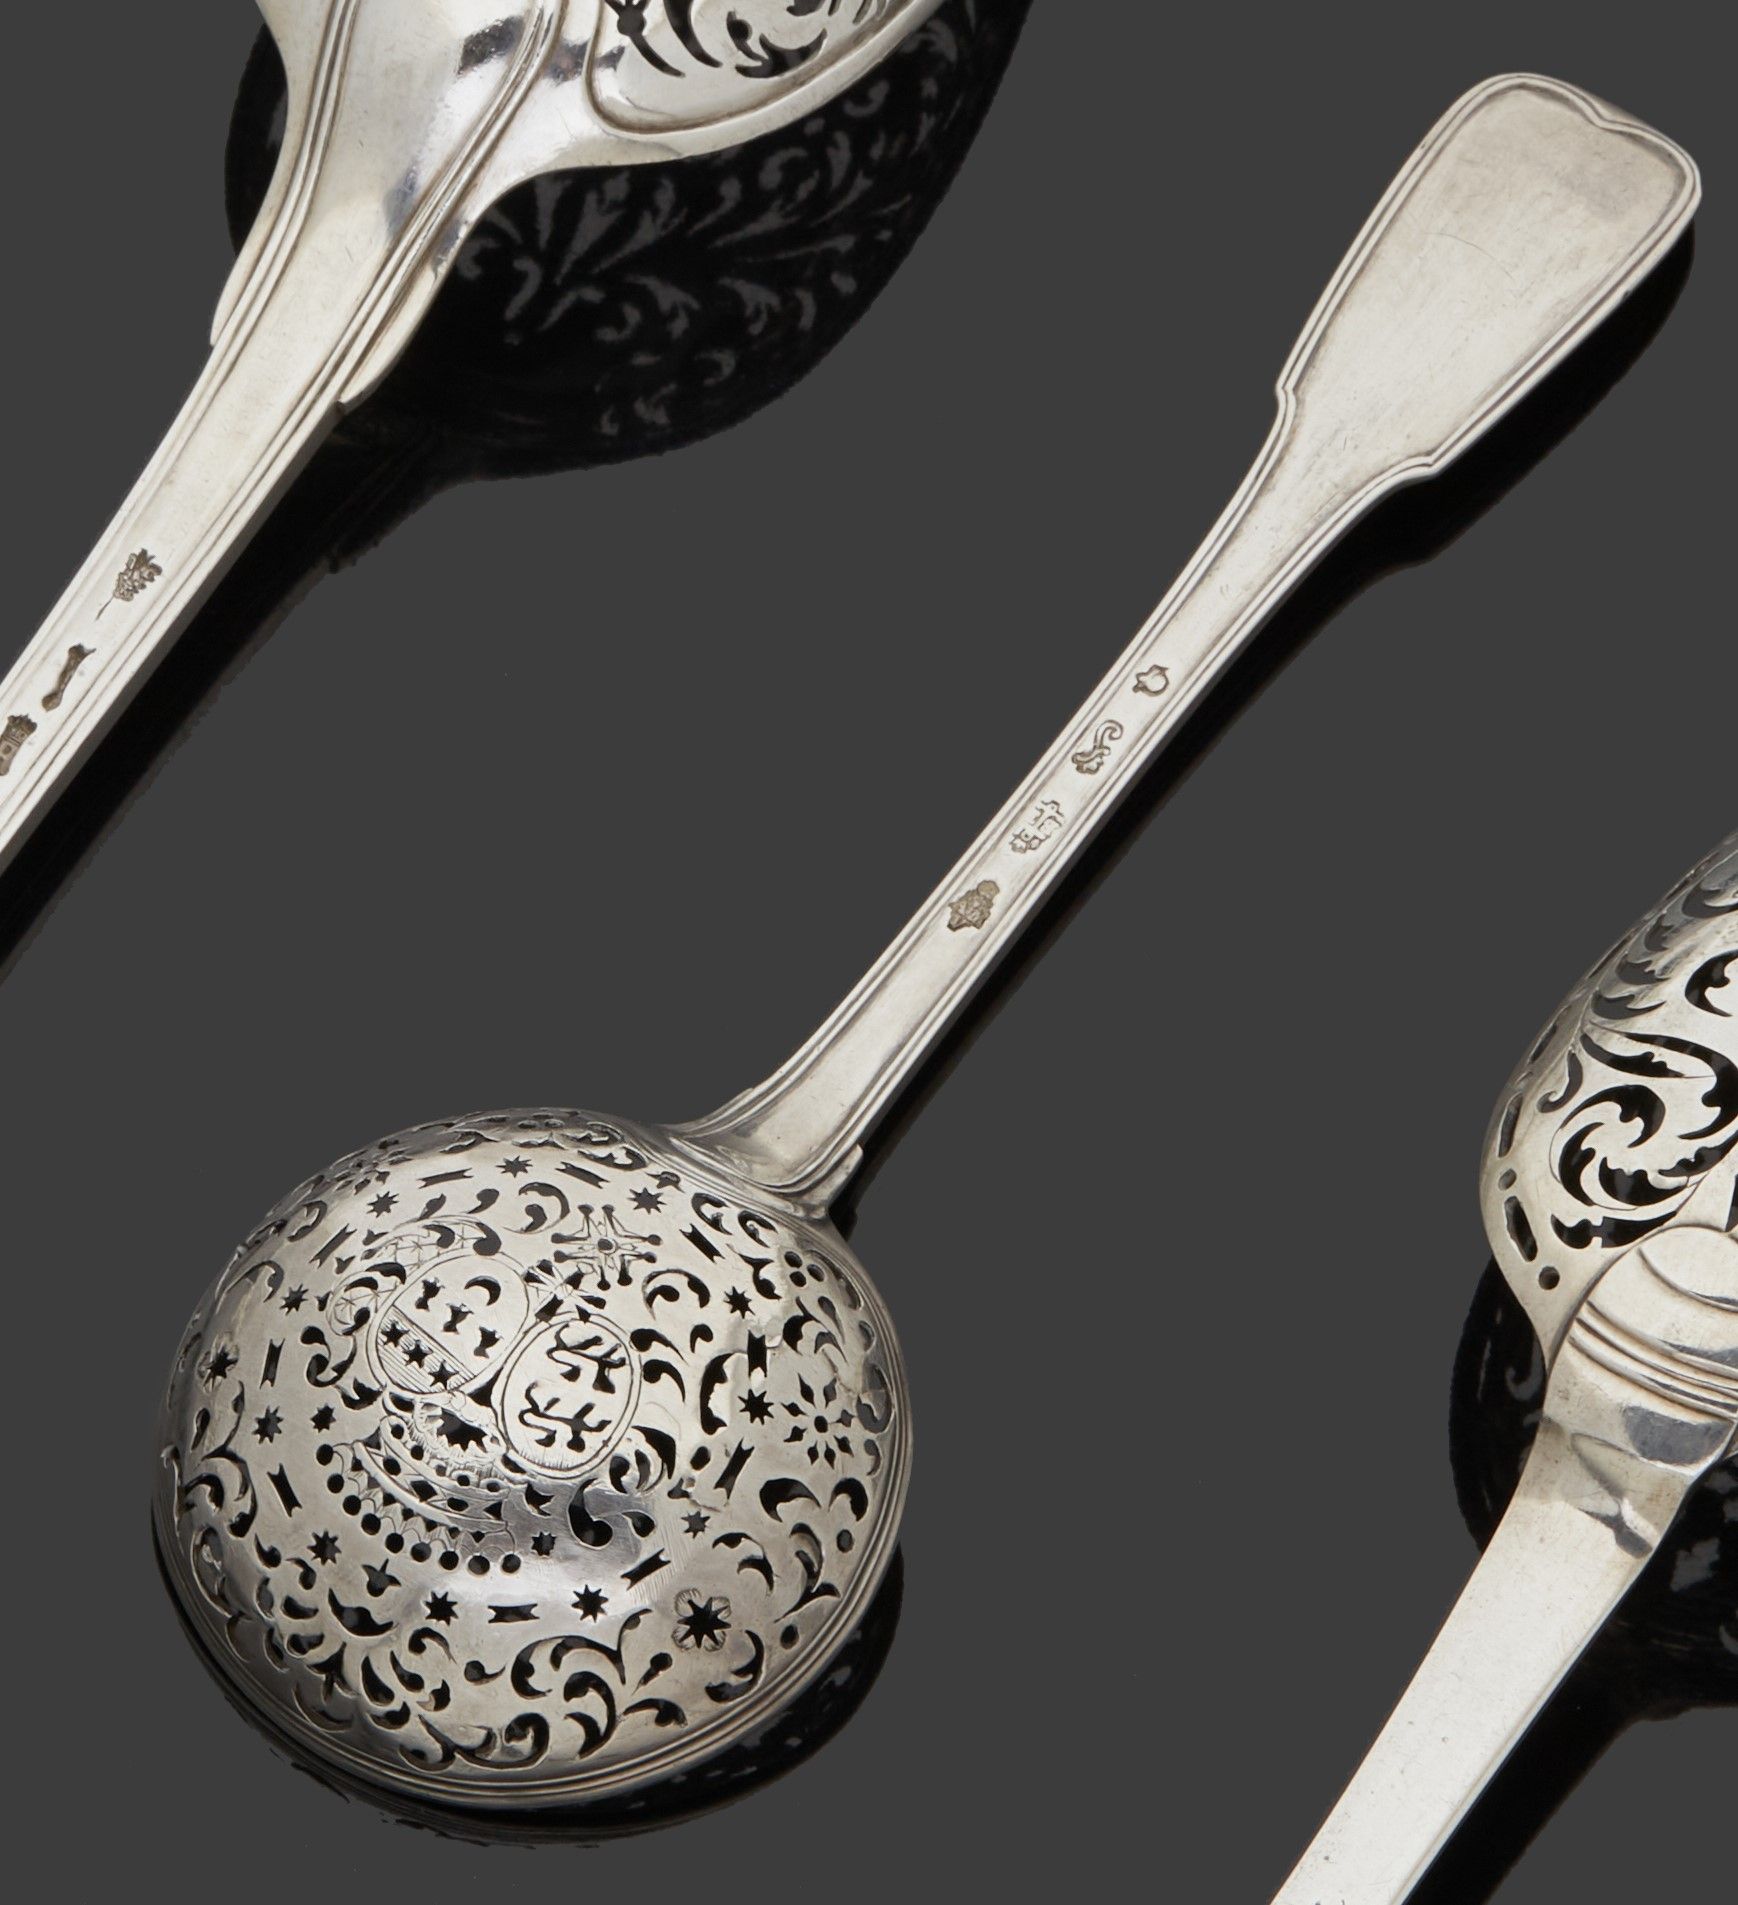 Null BREST 1752 - 1753
Small silver sugar spoon, model net and bordered spoon. T&hellip;